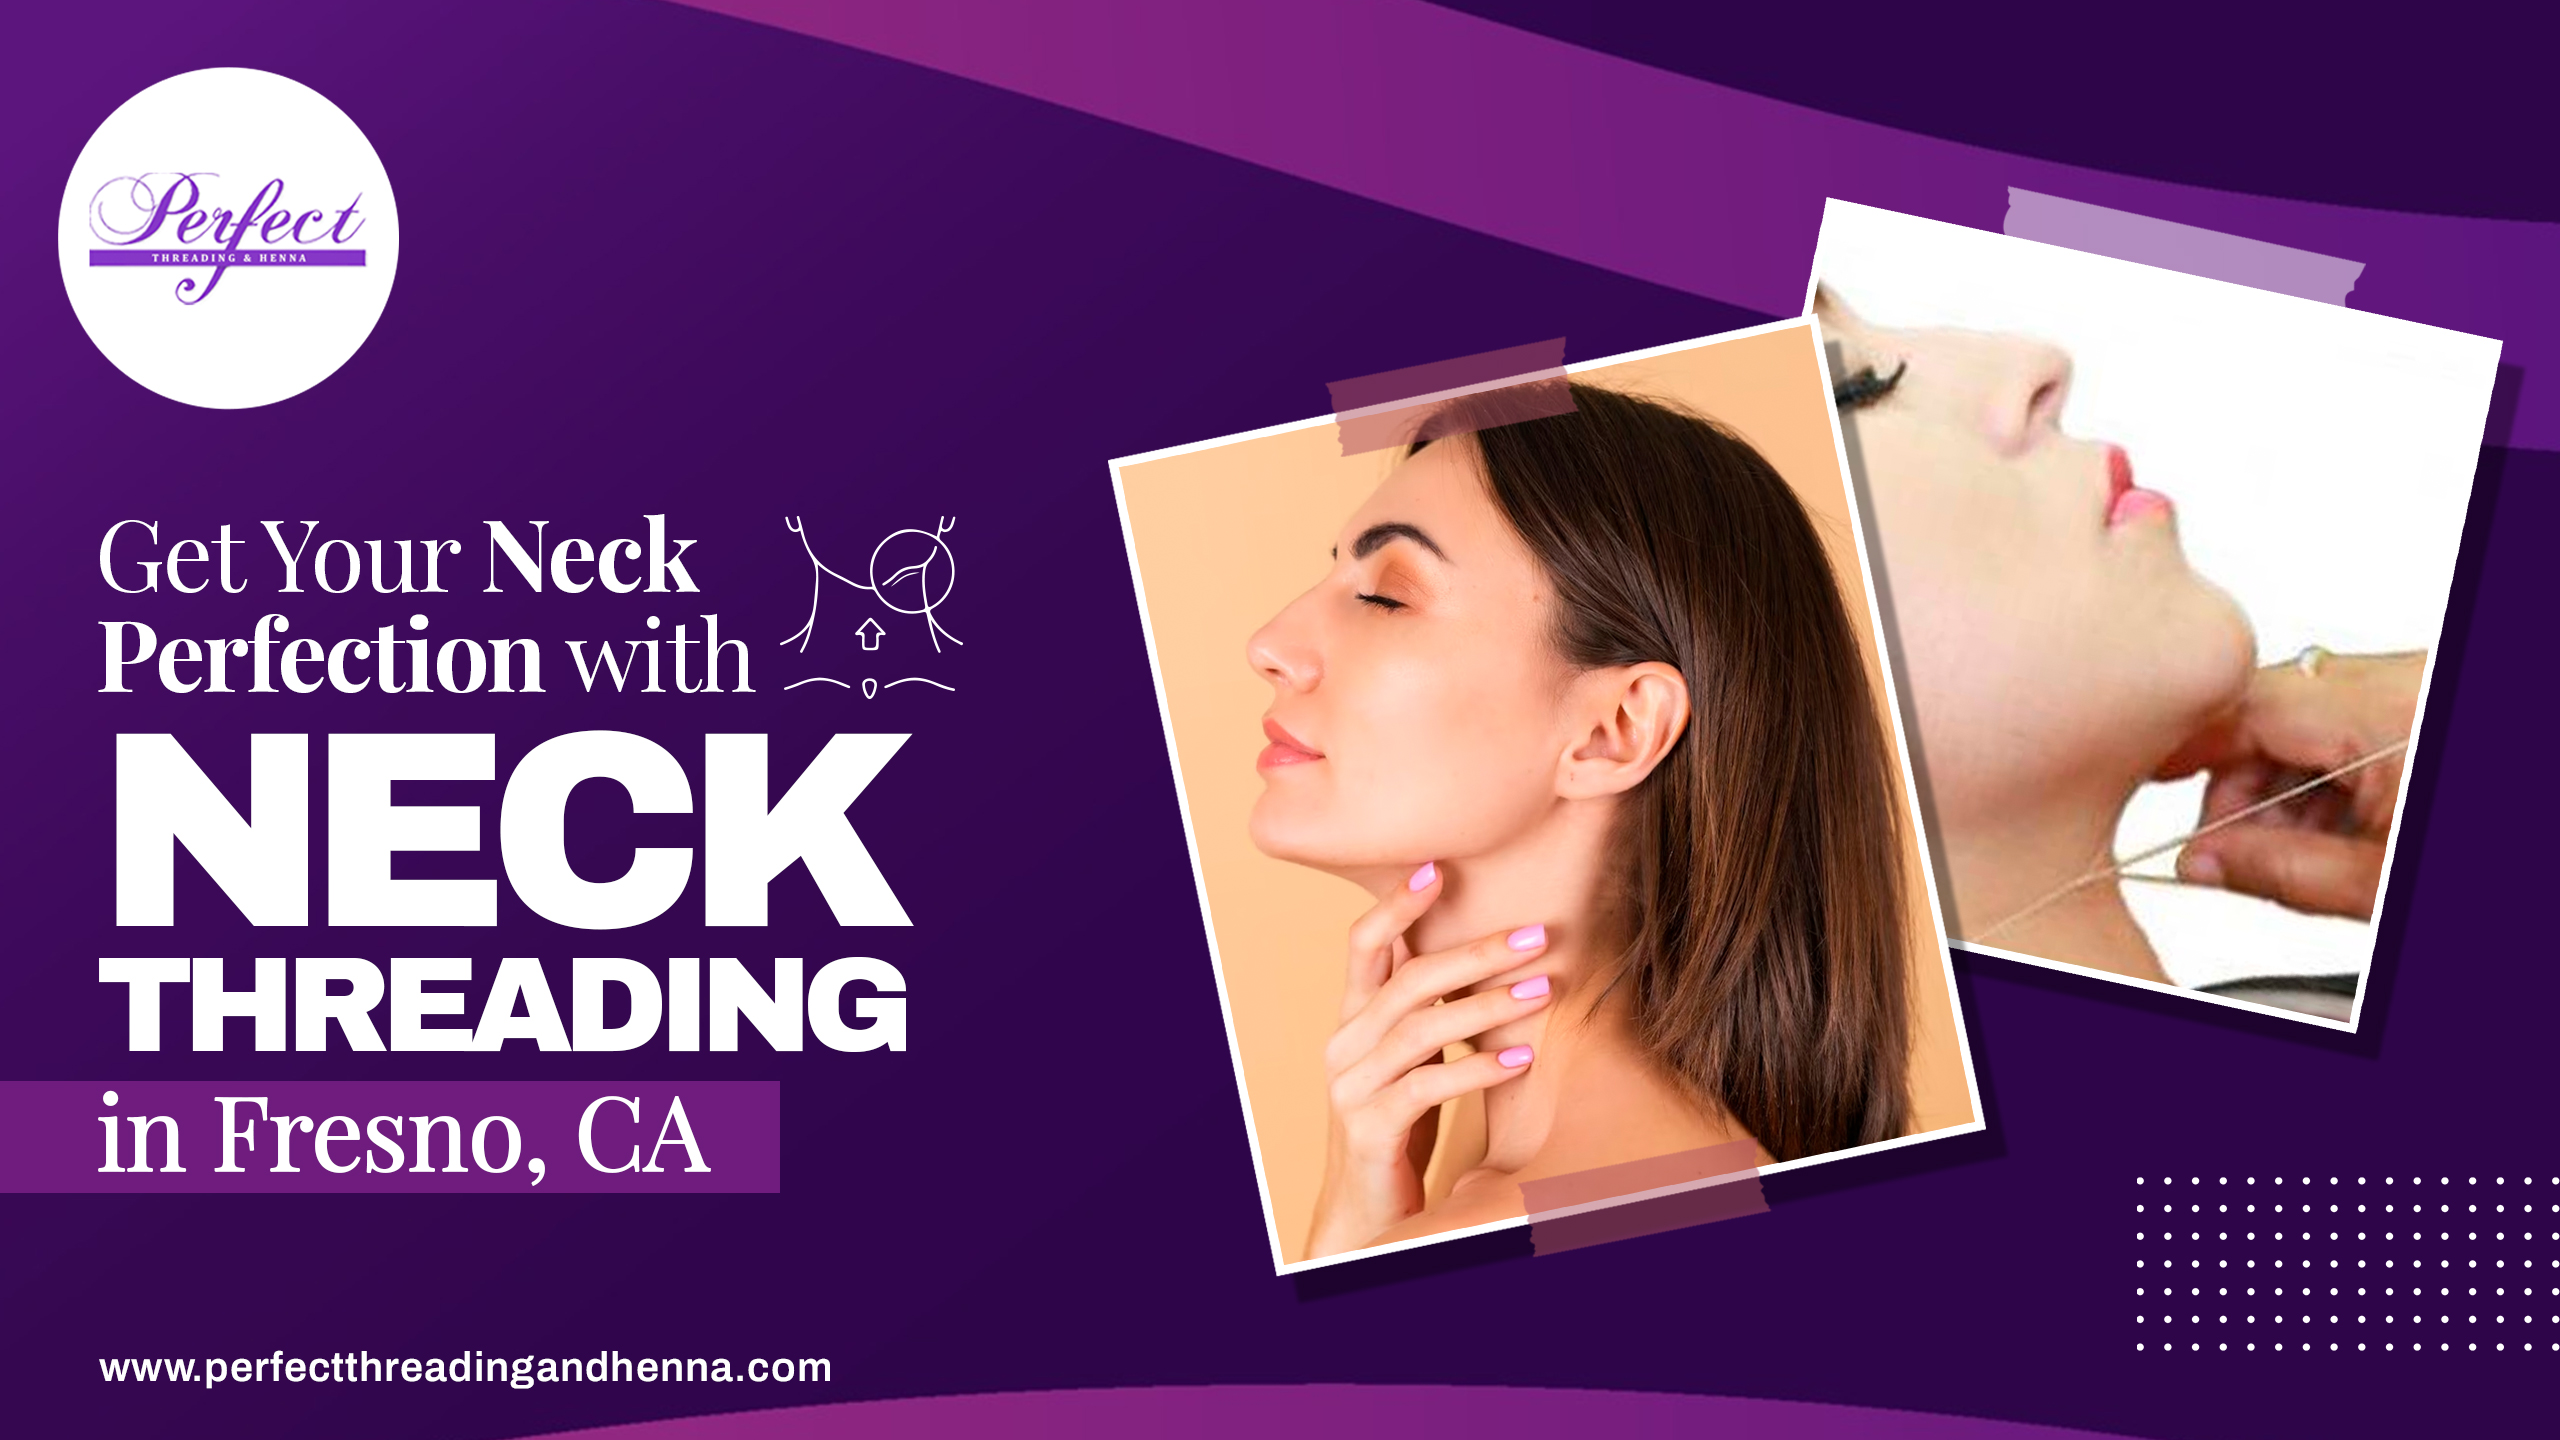 Get Your Neck Perfection with Neck Threading in Fresno, CA